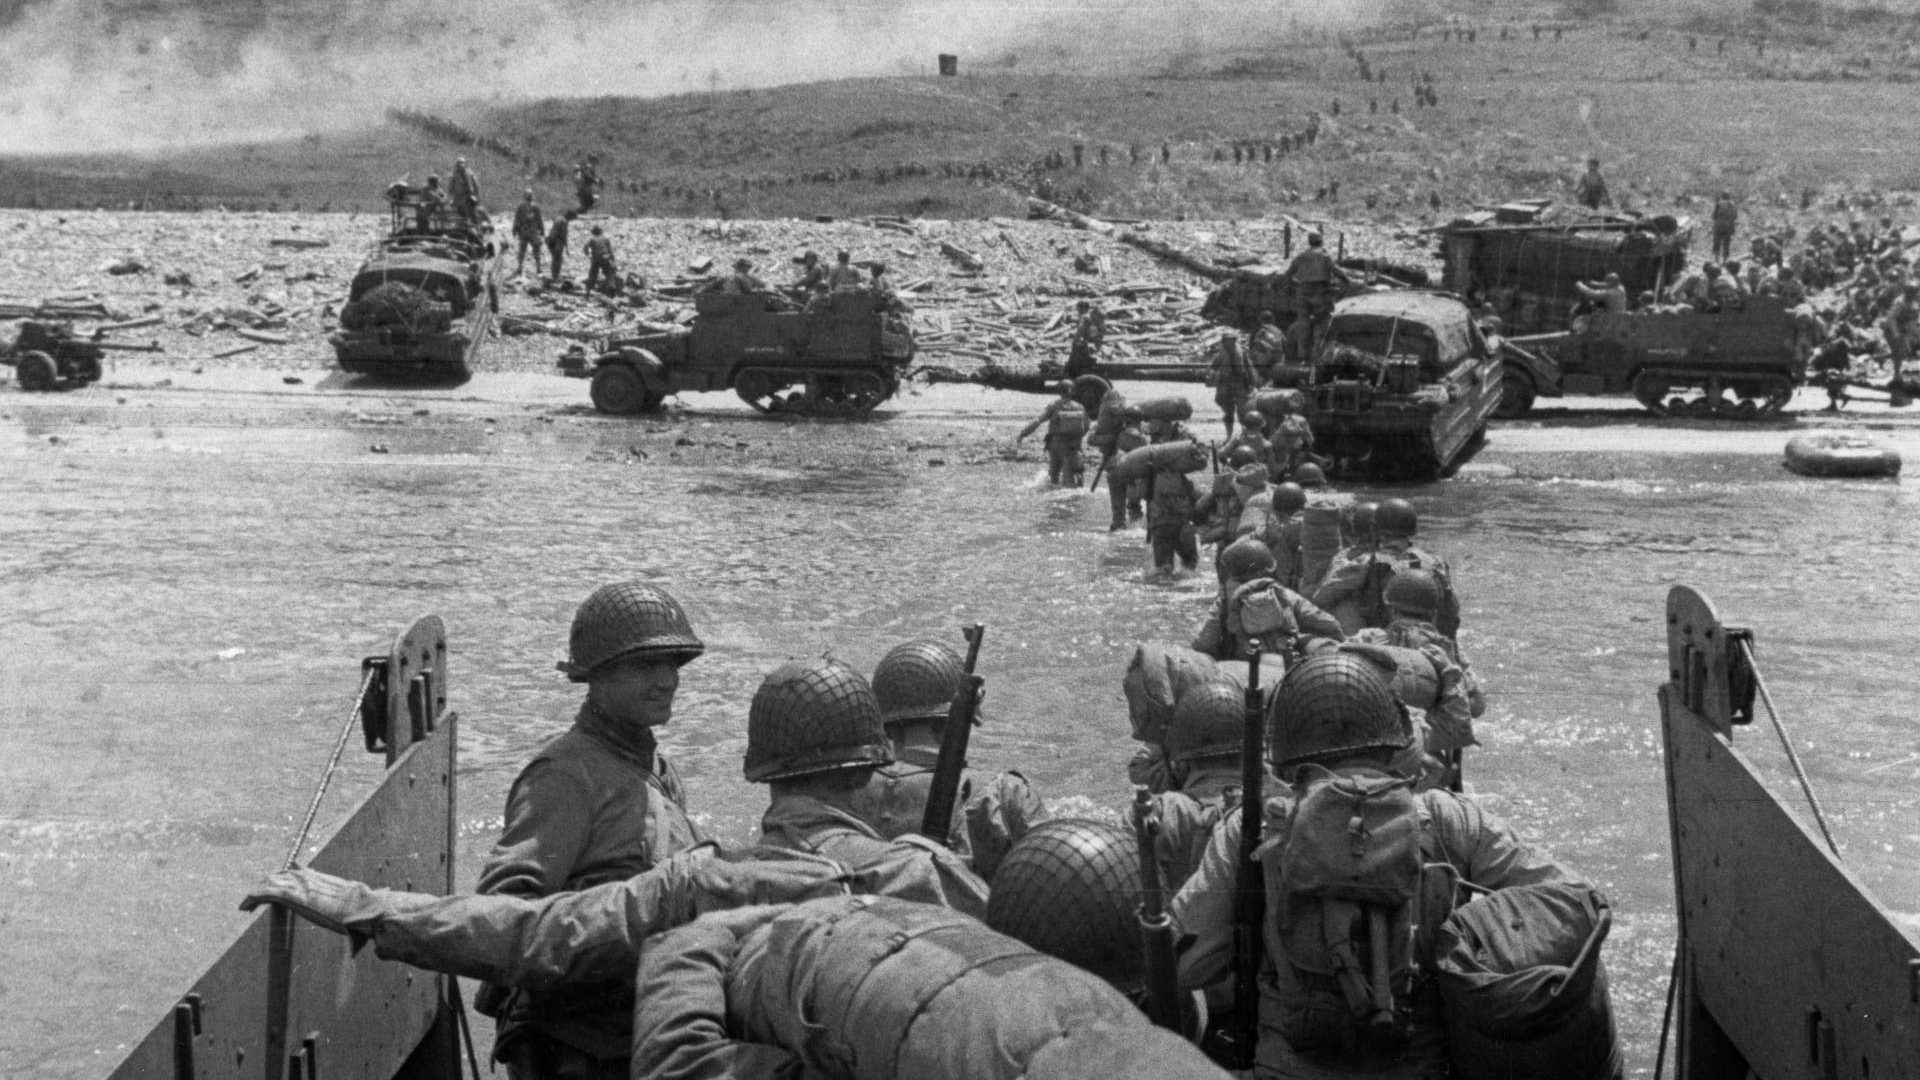 D Day Battle of Normandy